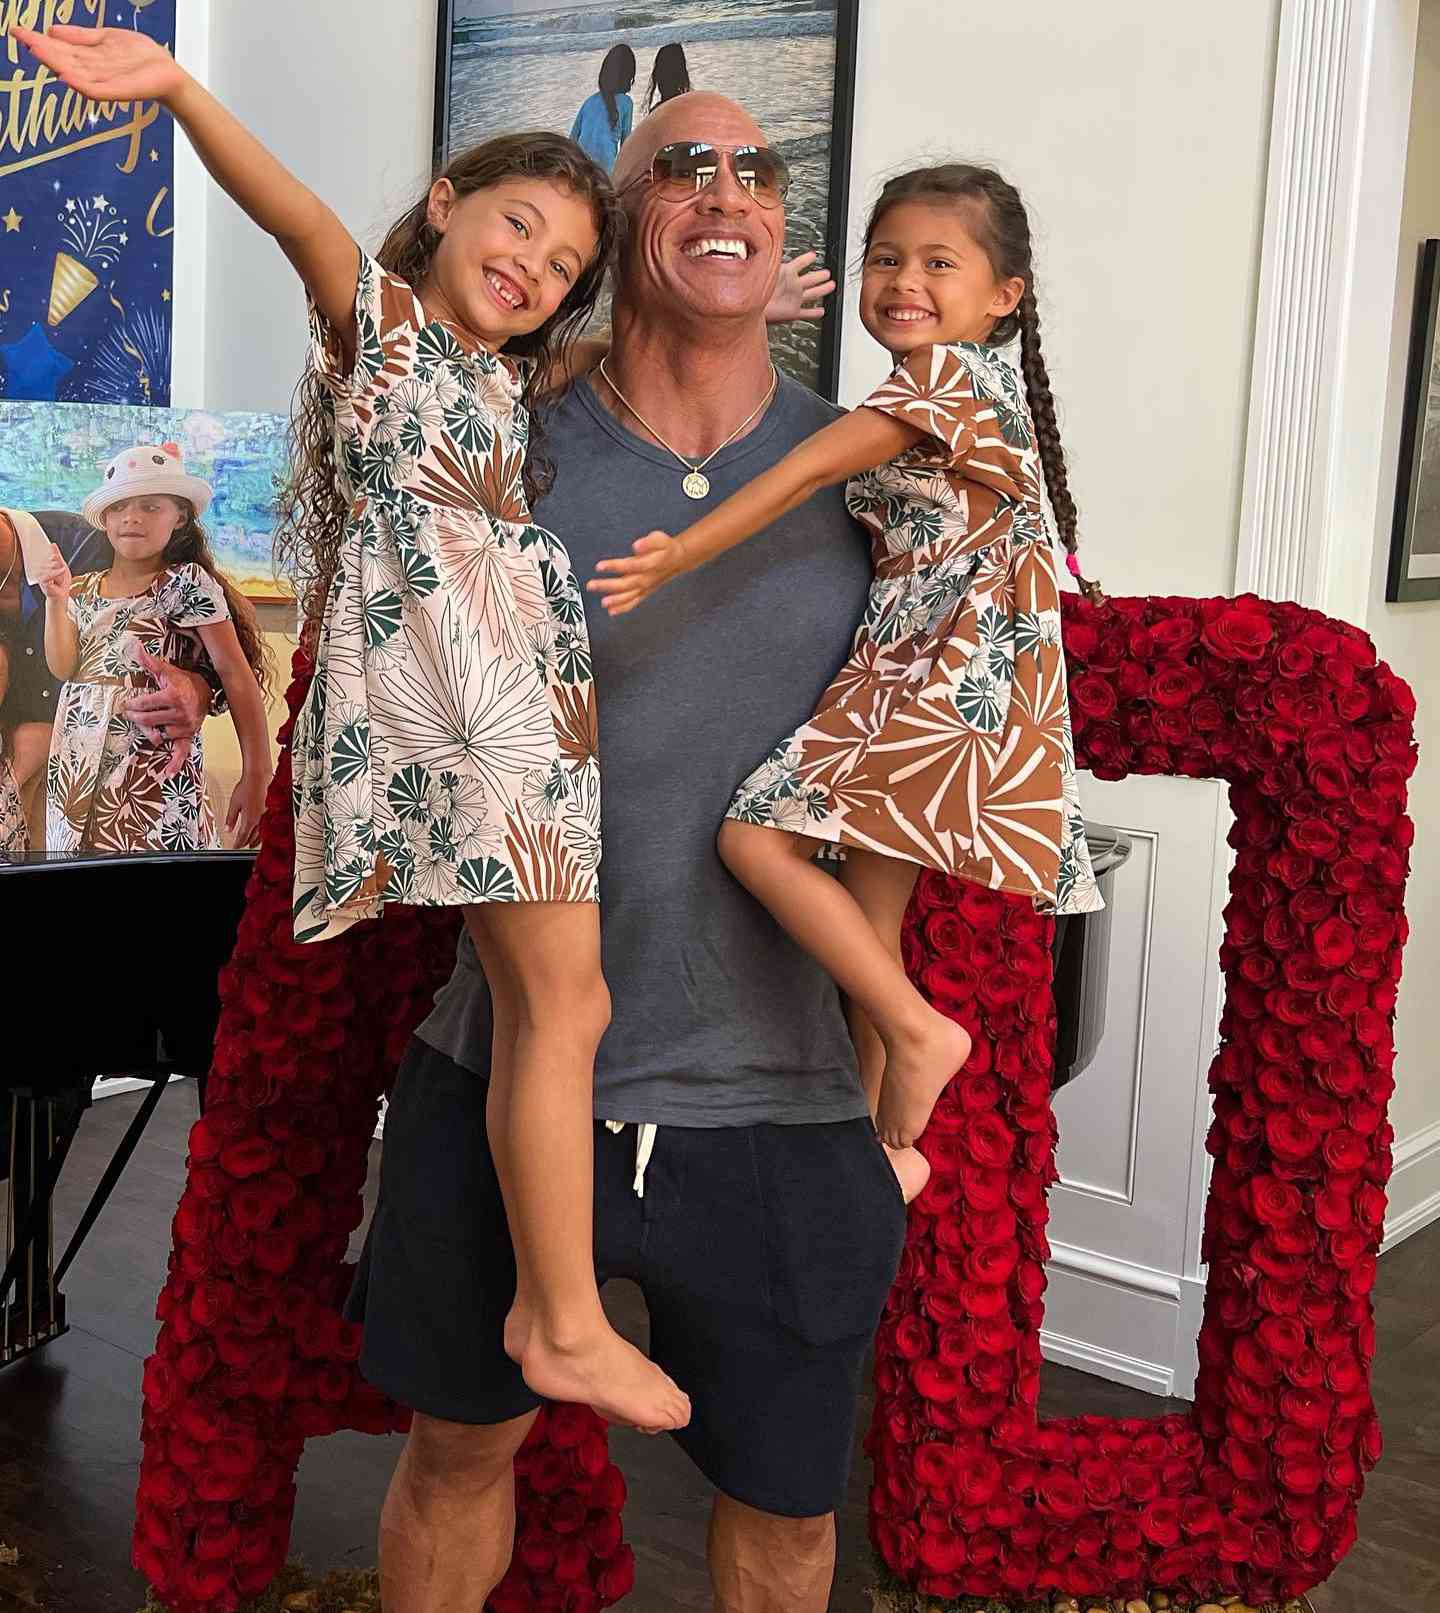 Dwayne Johnson Shares His Daughter Refuses to Believe Her Daddy is MAUI from Disney's Movie MOANA. https://www.instagram.com/therock/.